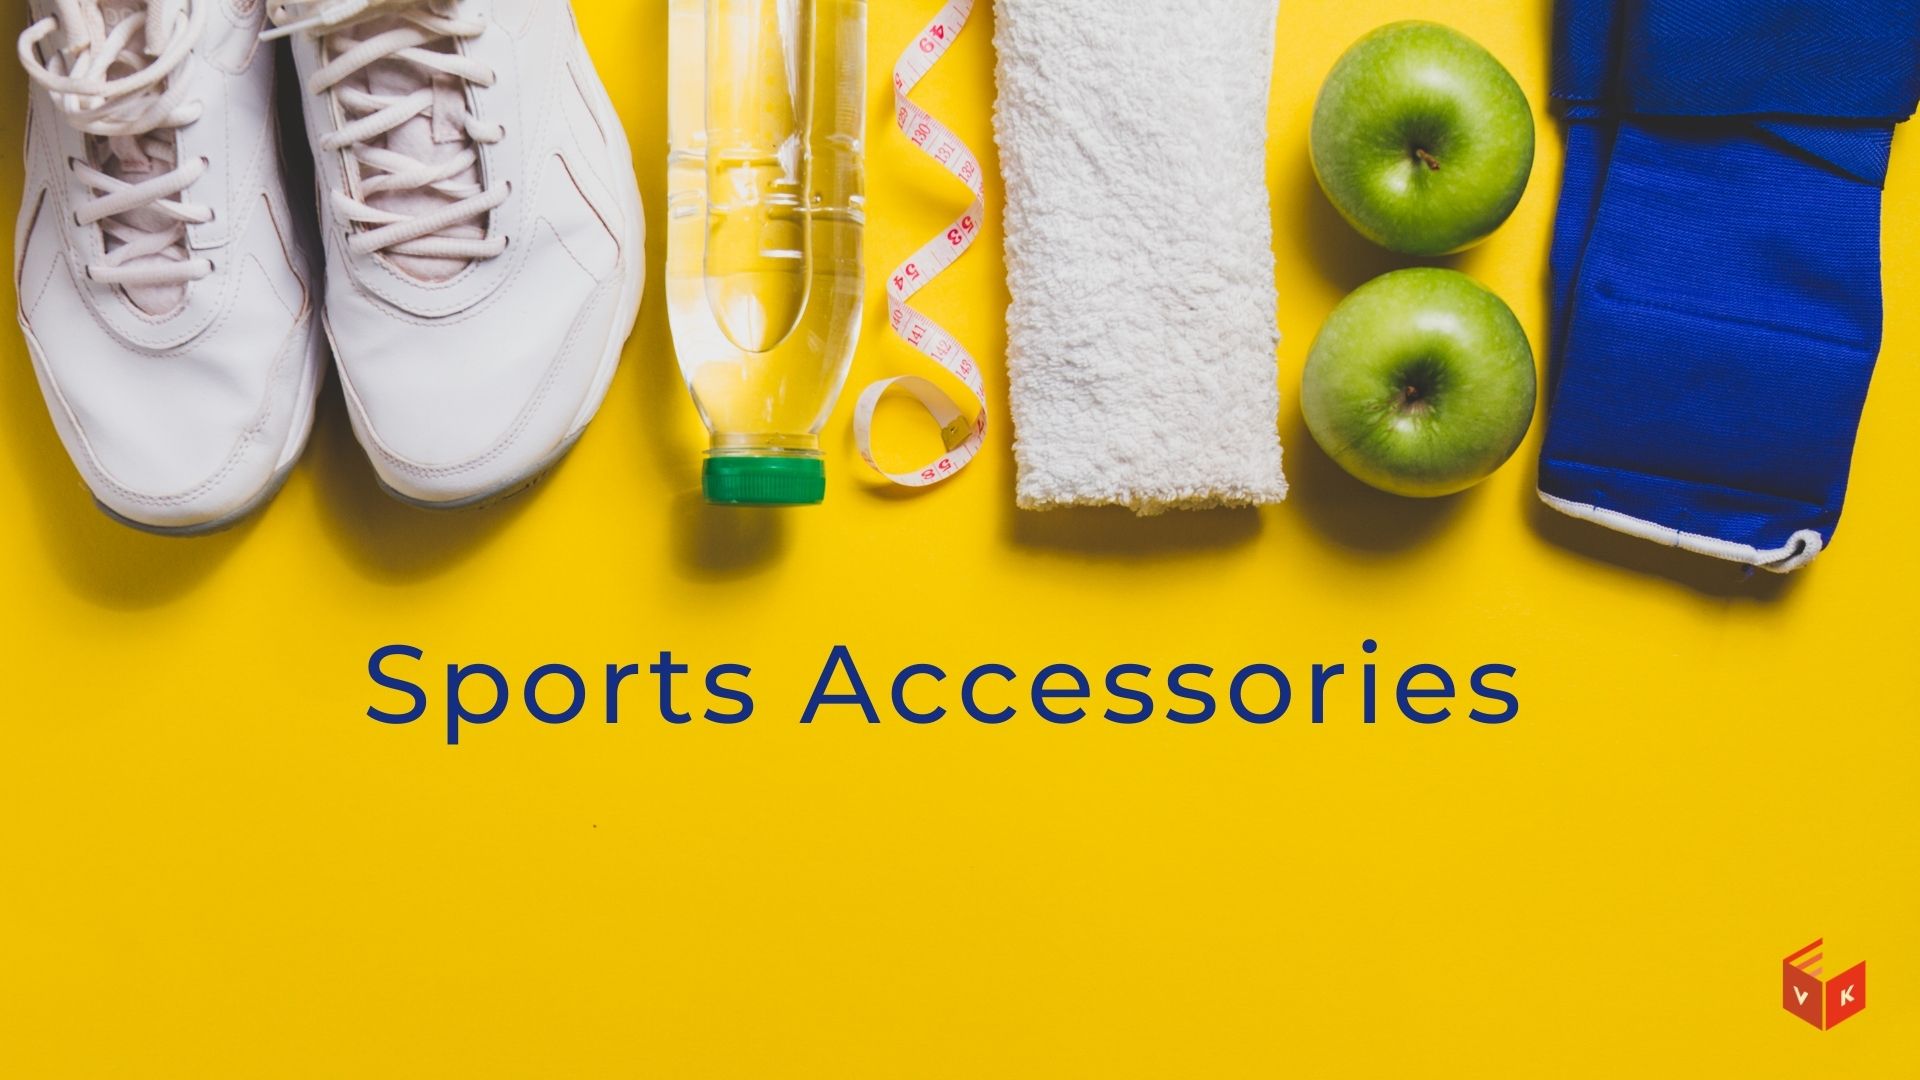 Basic Sports Accessories You Should Have for Sporting Activities